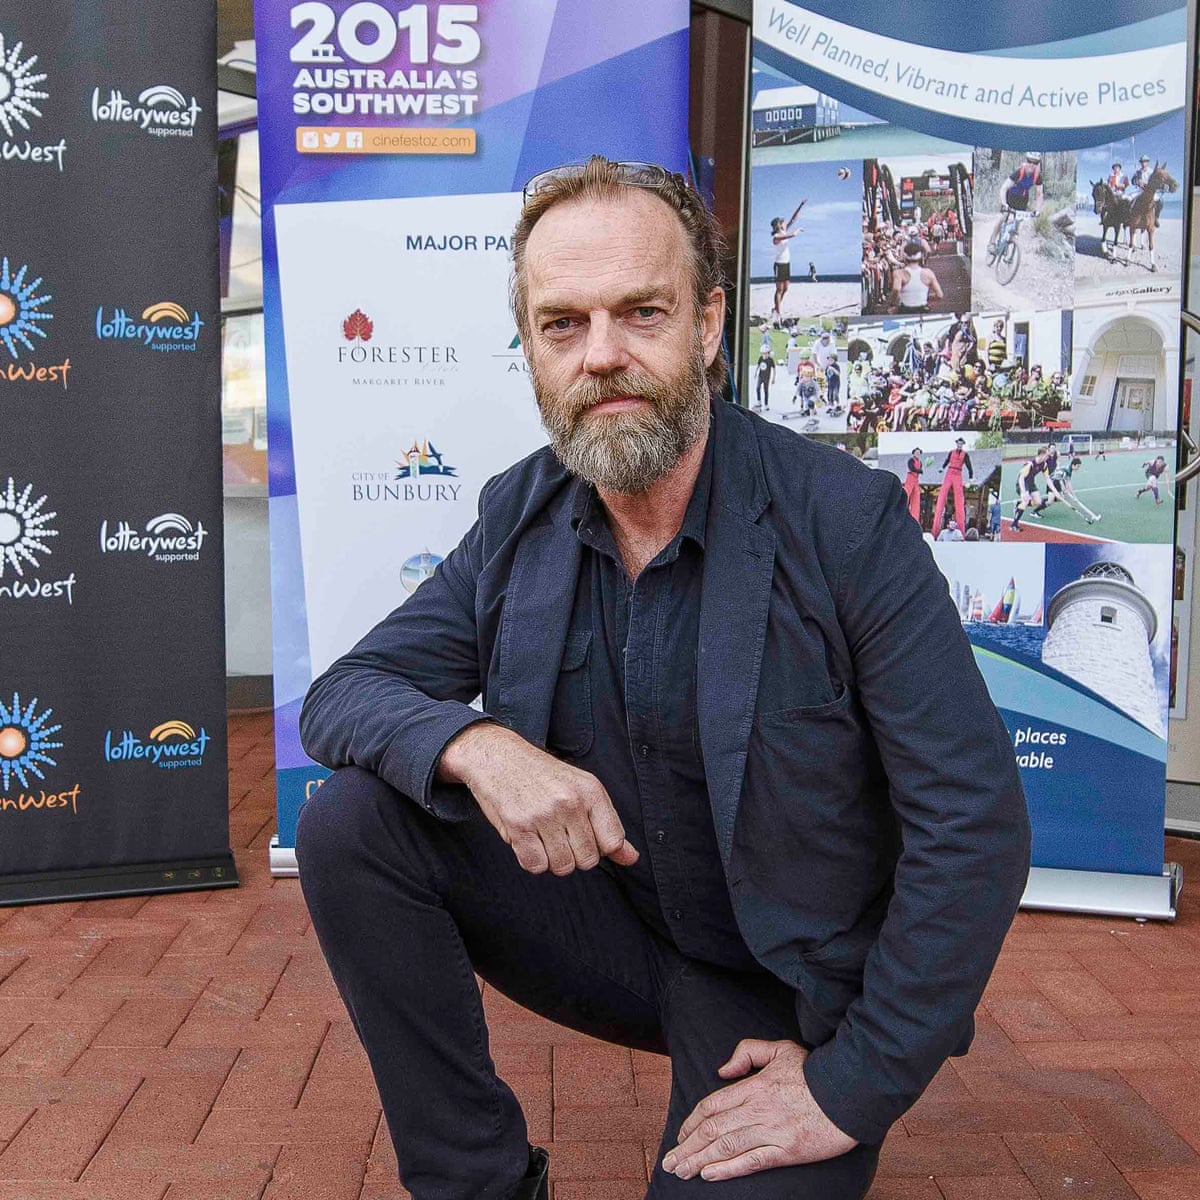 Hugo Weaving: Just because Australian films aren't seen doesn't mean they  don't exist, Hugo Weaving